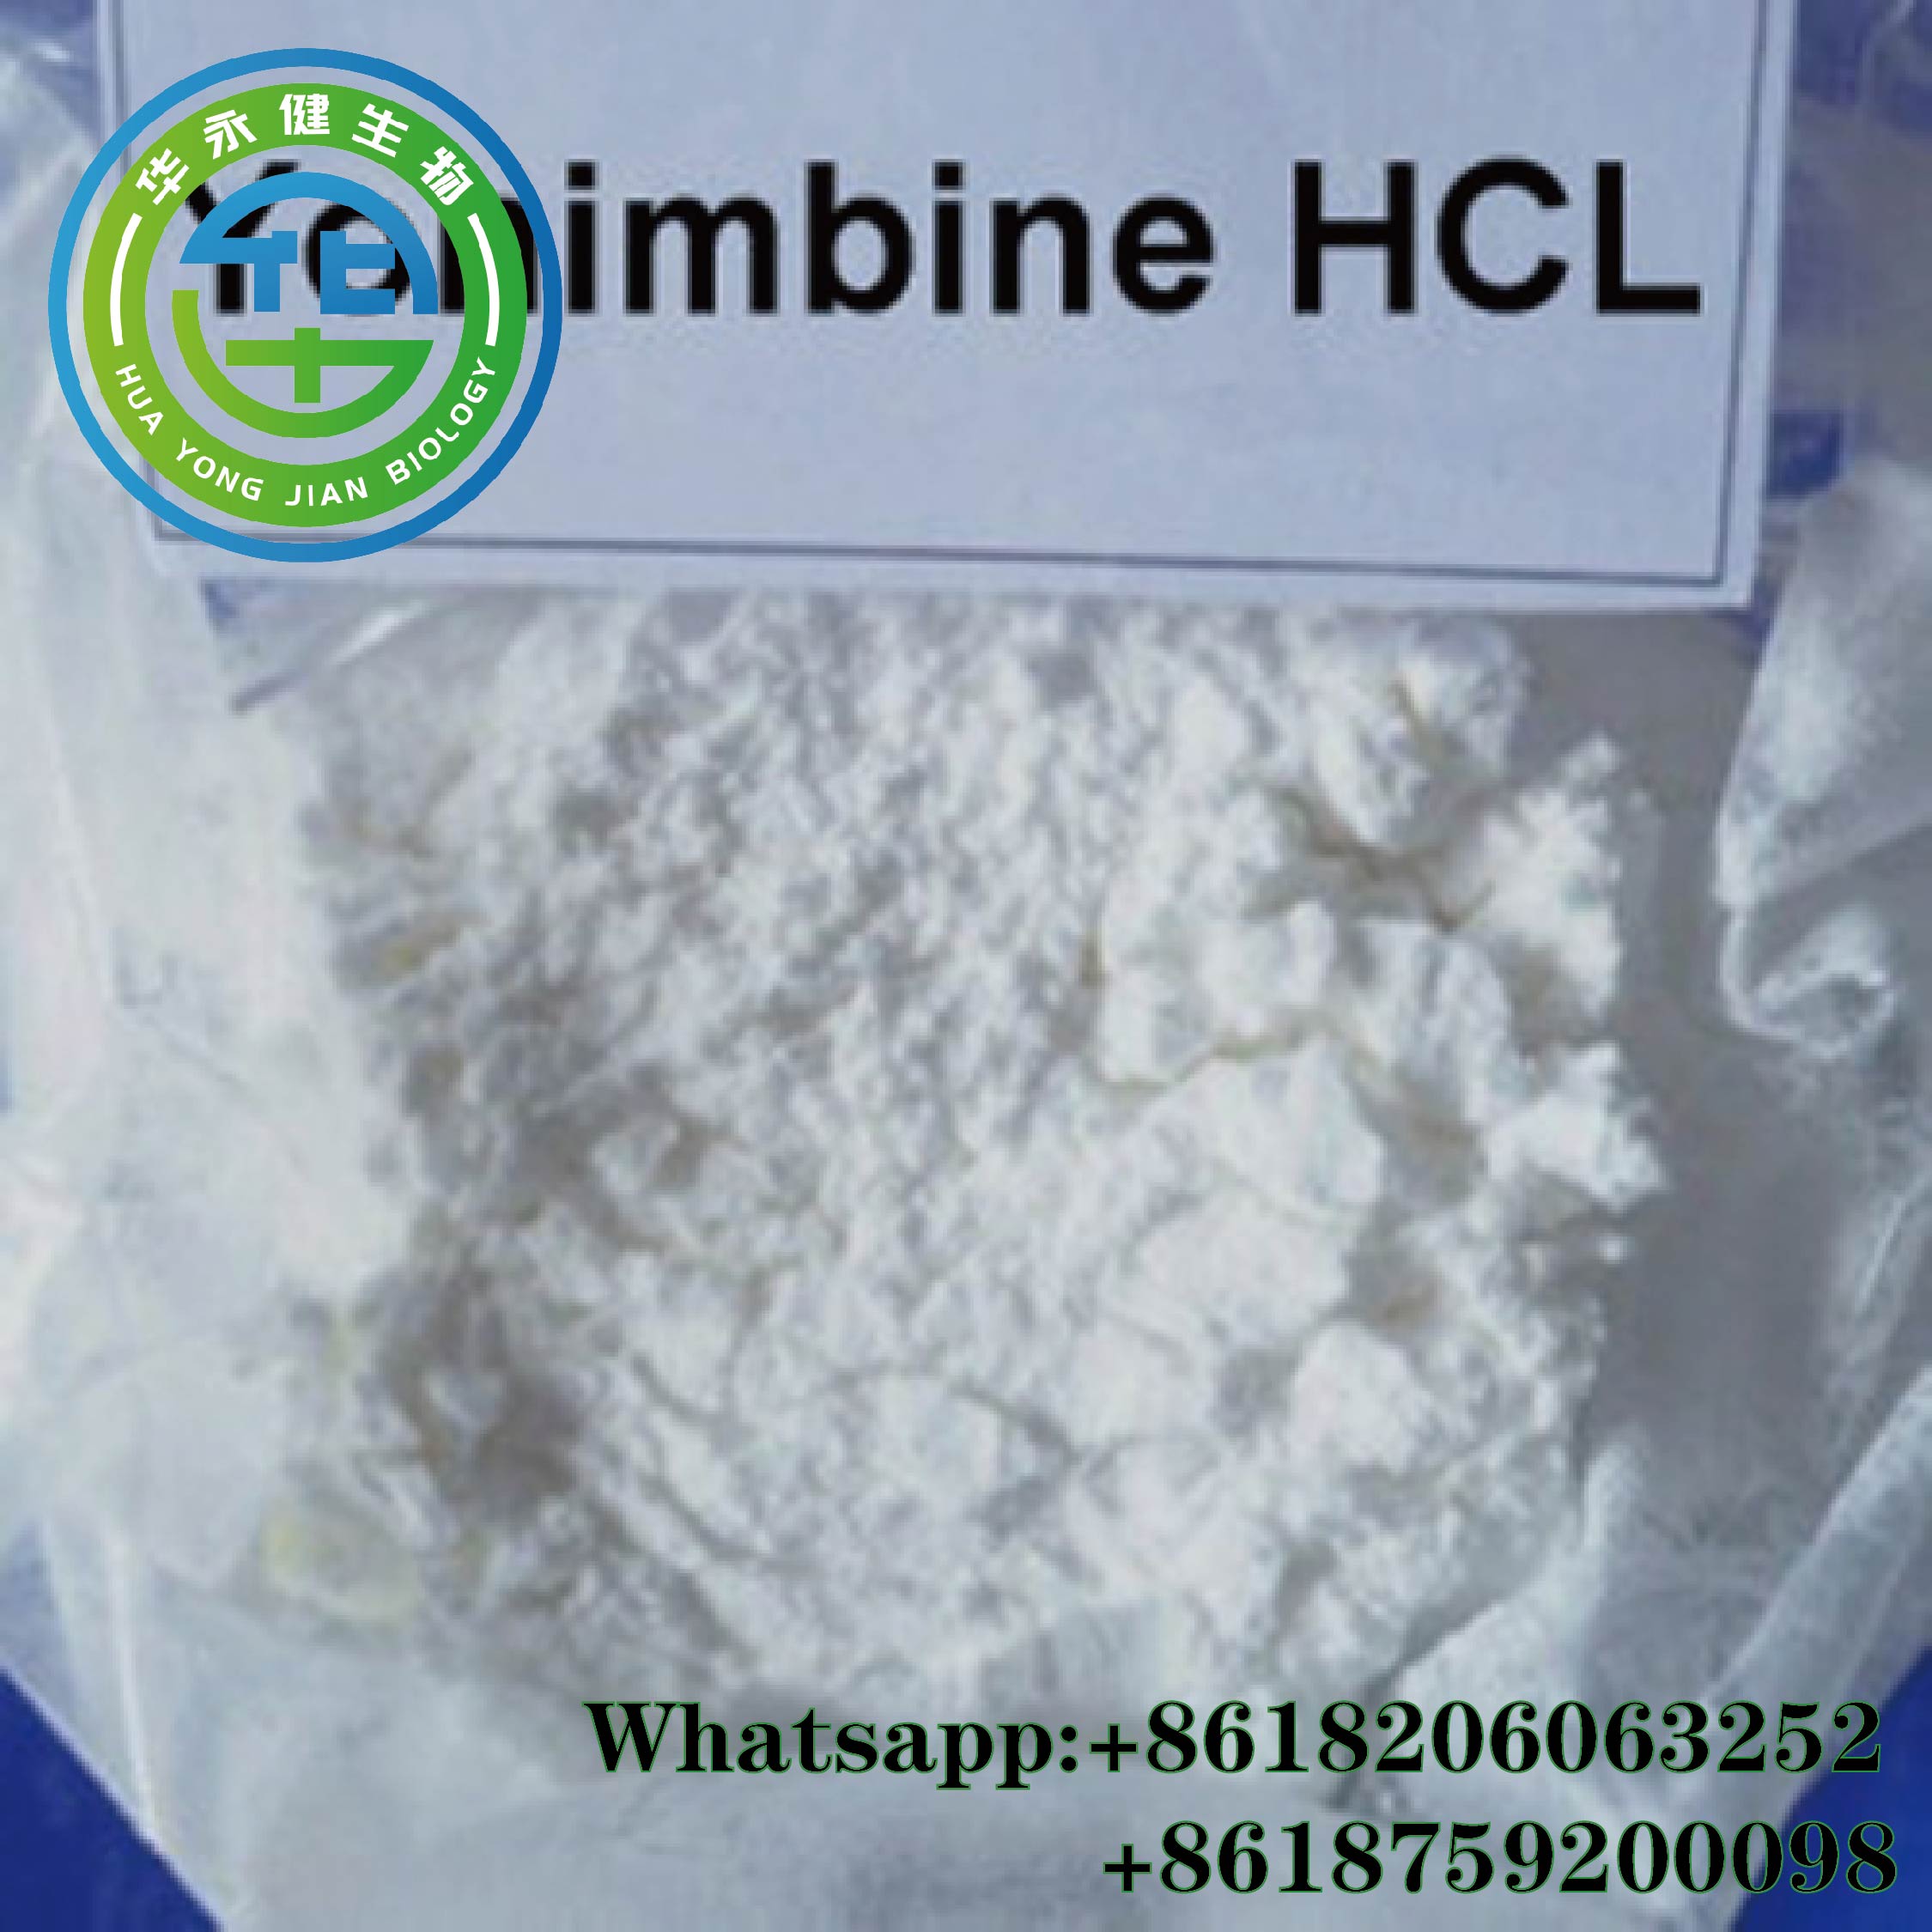 Strong Man Sexual Satisfaction Weight Loss Yohimbine HCl Male Enhancement Powders for Bodybuilding CasNO.65-19-0